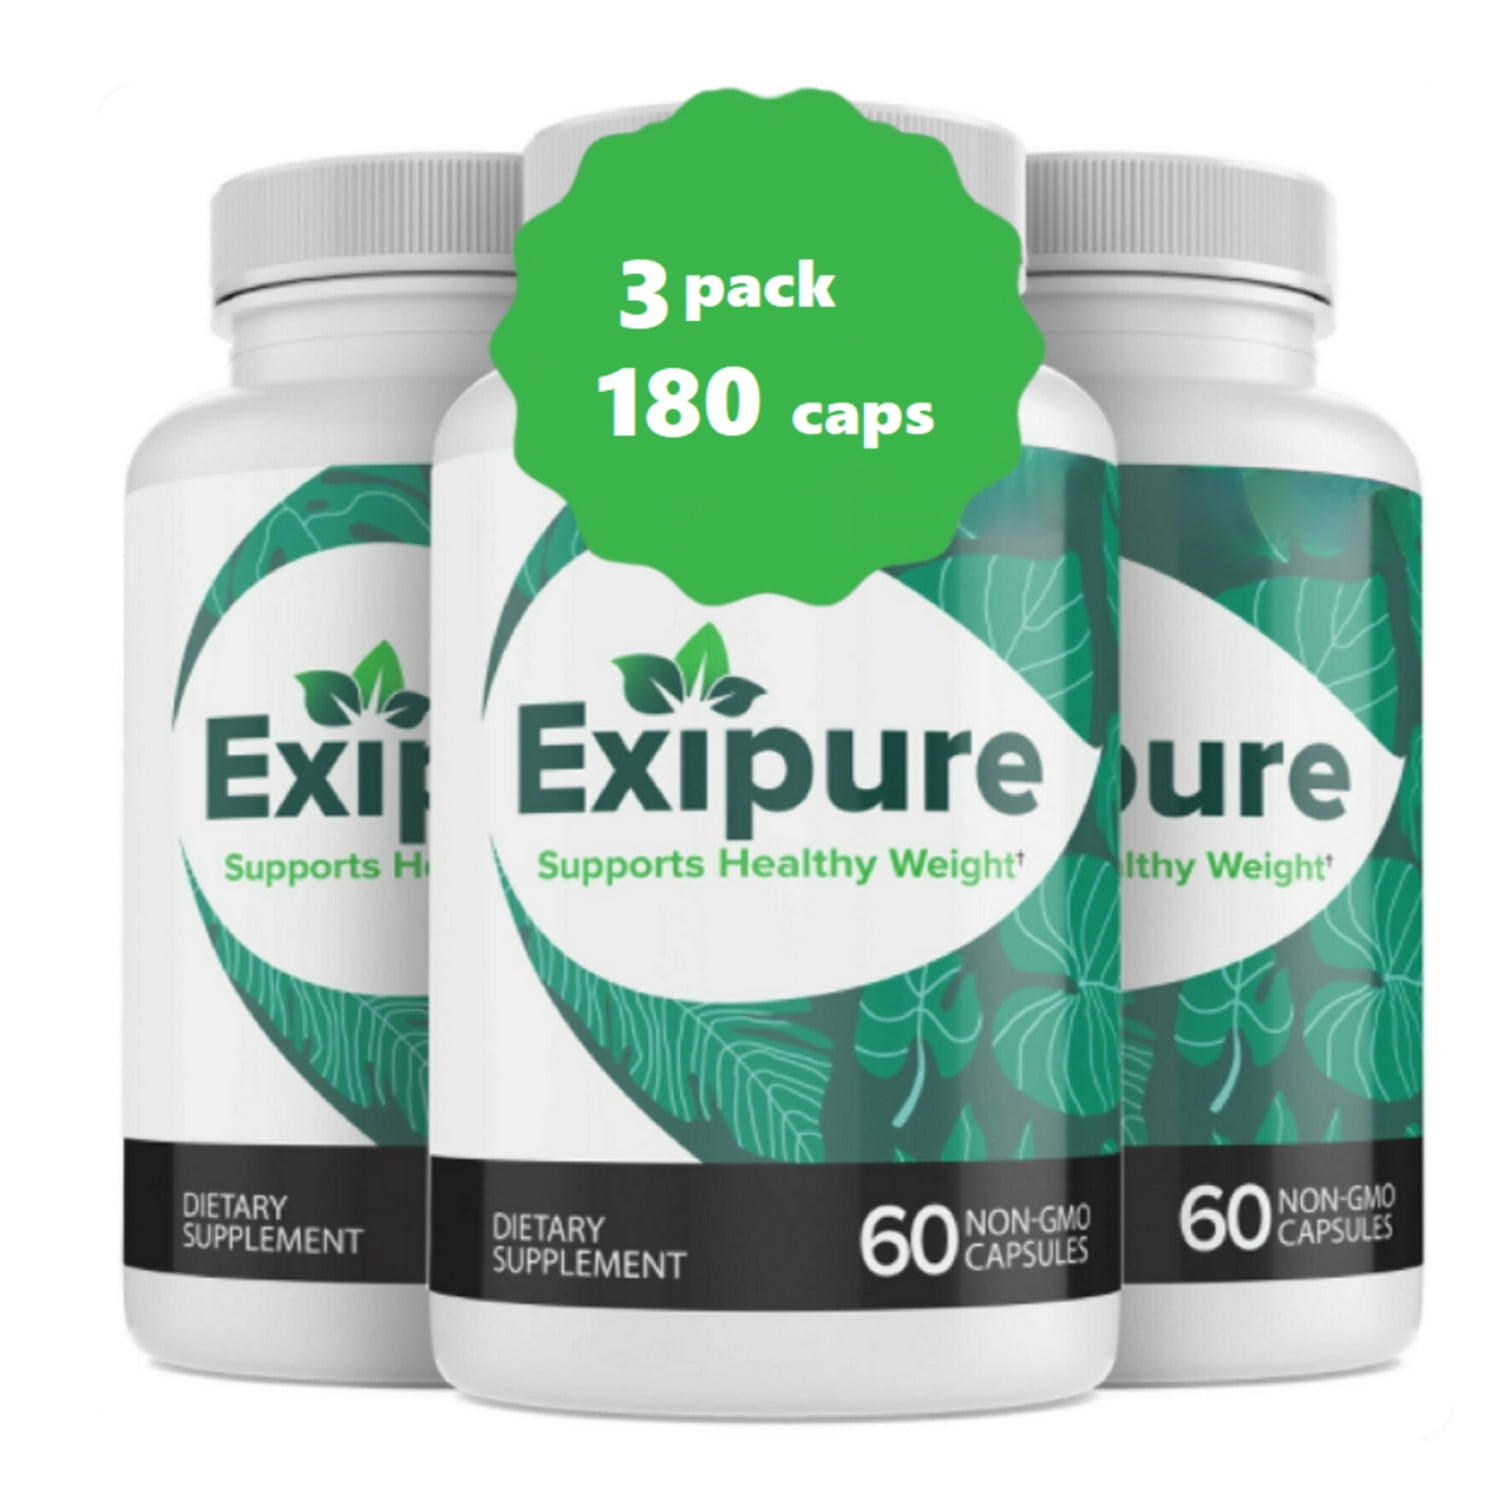 Exipure Reviews SCAM ALERT Must Read Before Buying